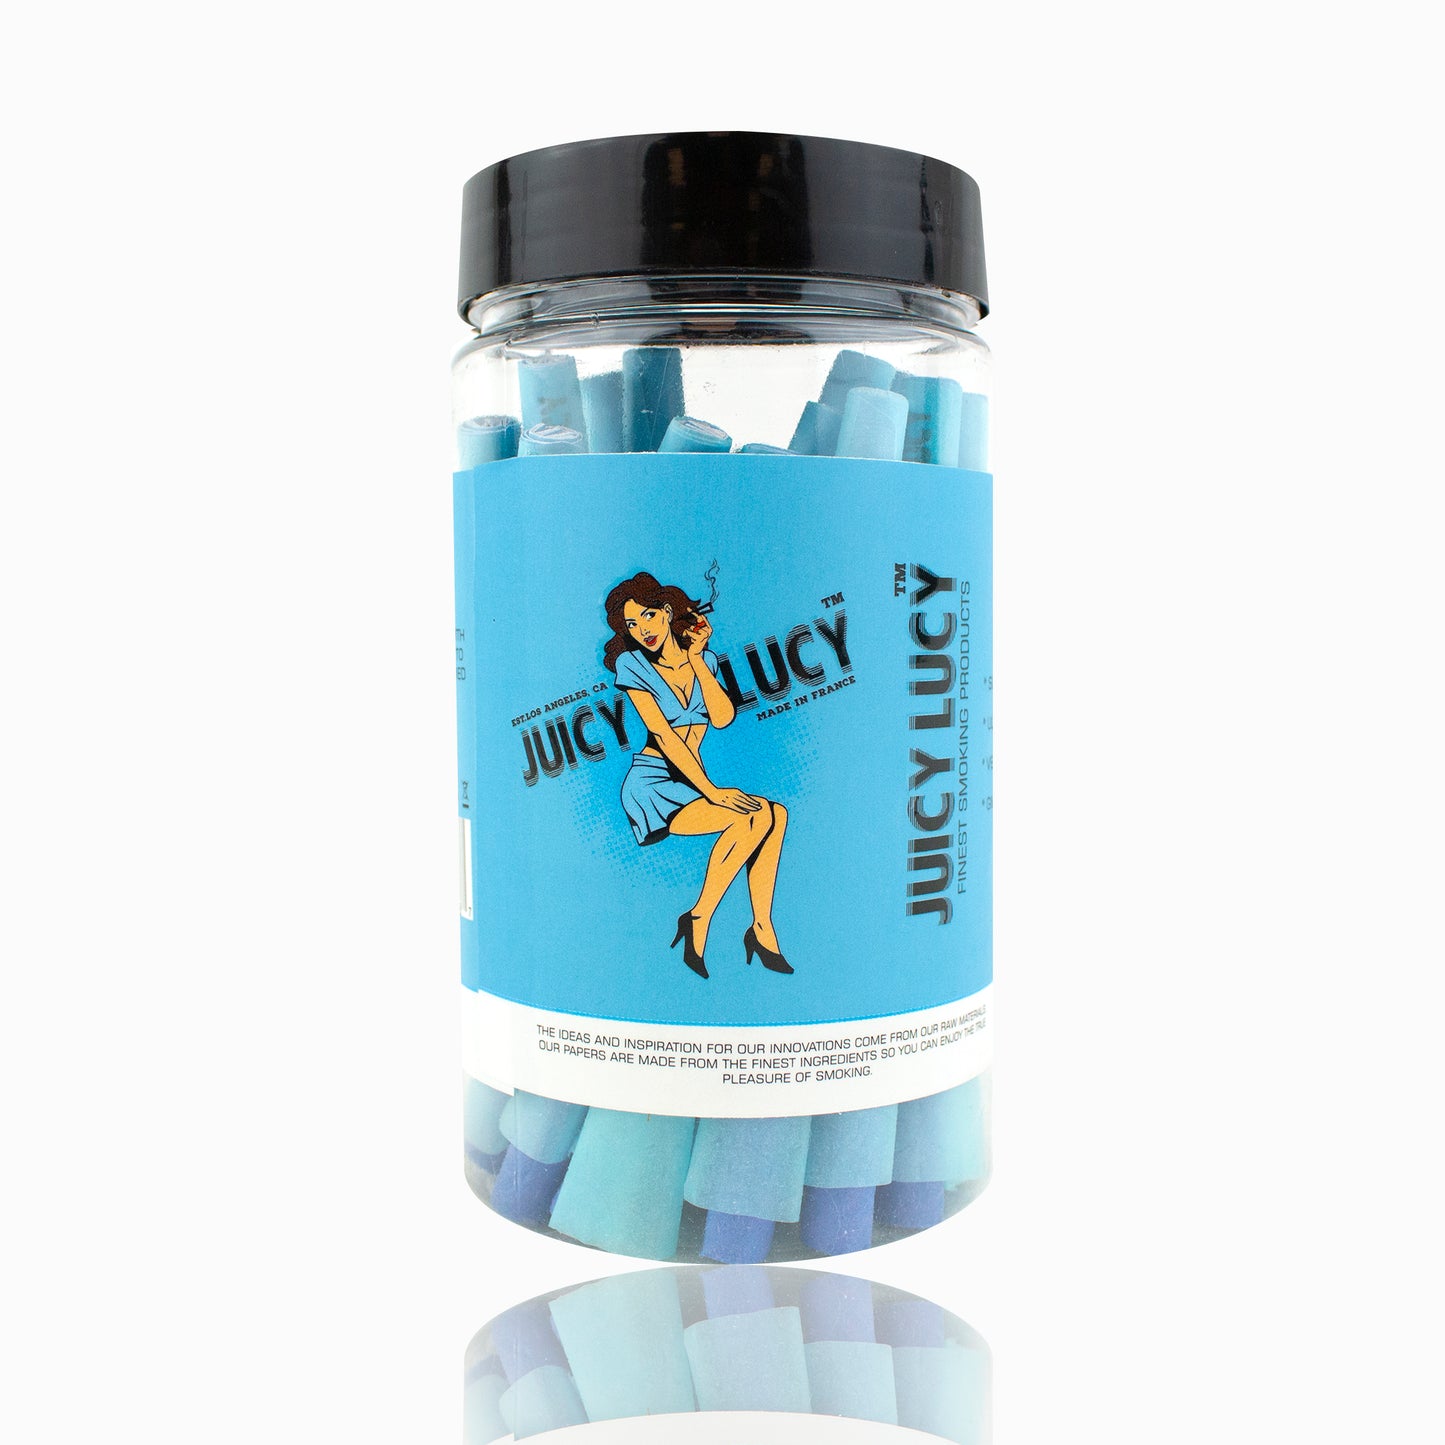 STOKES Juicy Lucy Blue 53mm (Jar 50ct)